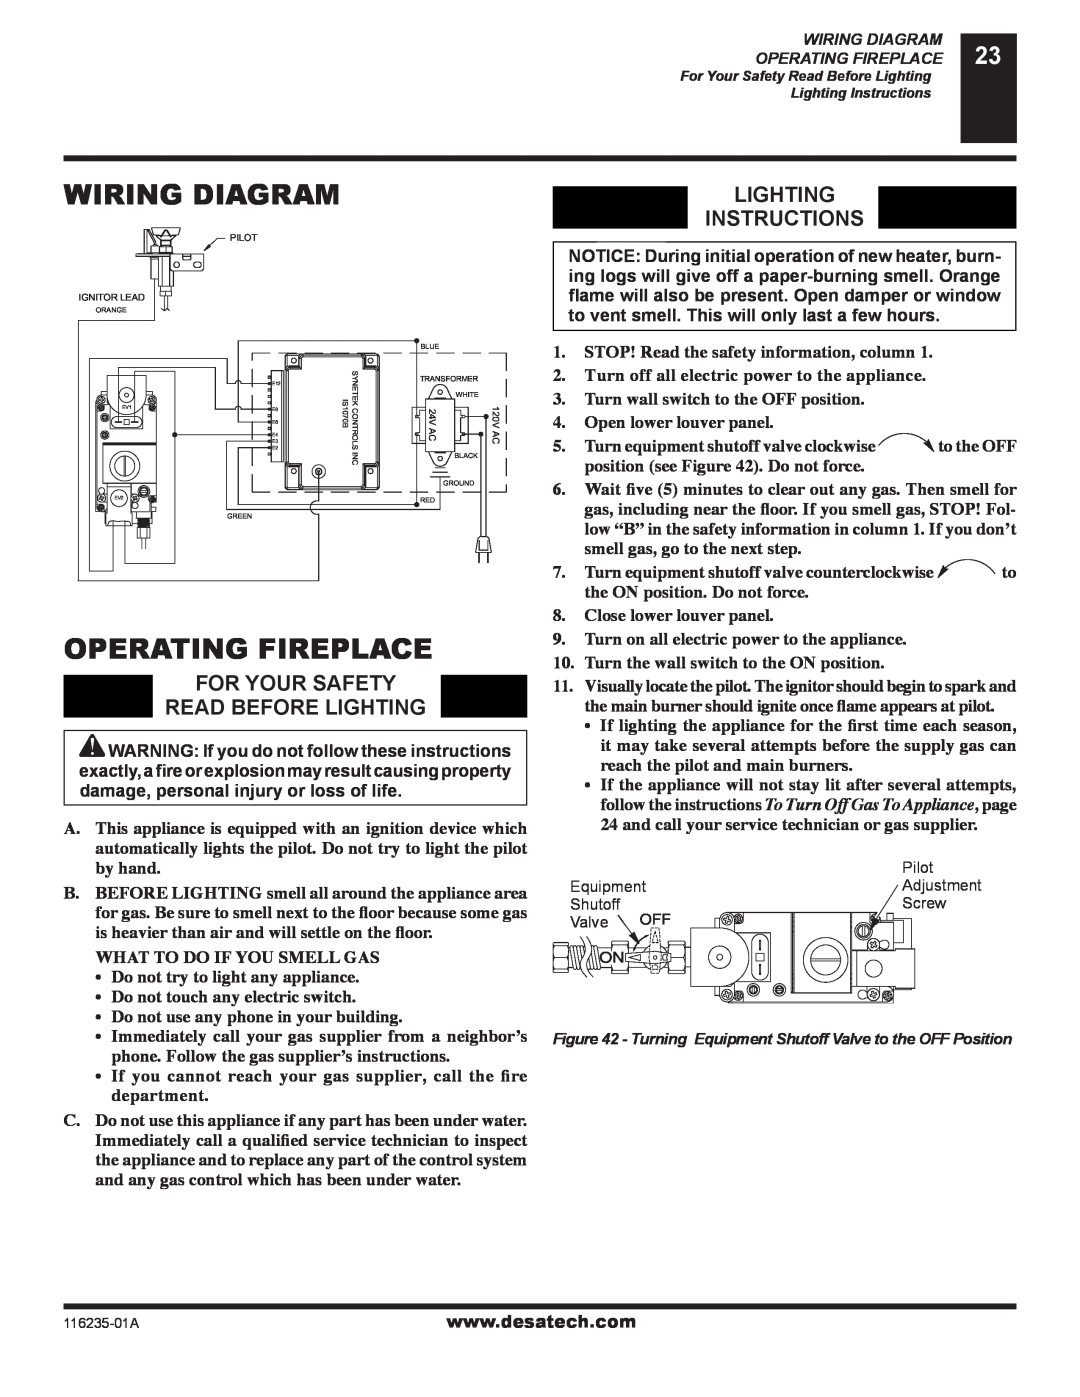 Desa (V)VC36NE Series Wiring Diagram, Operating Fireplace, Lighting Instructions, For Your Safety Read Before Lighting 